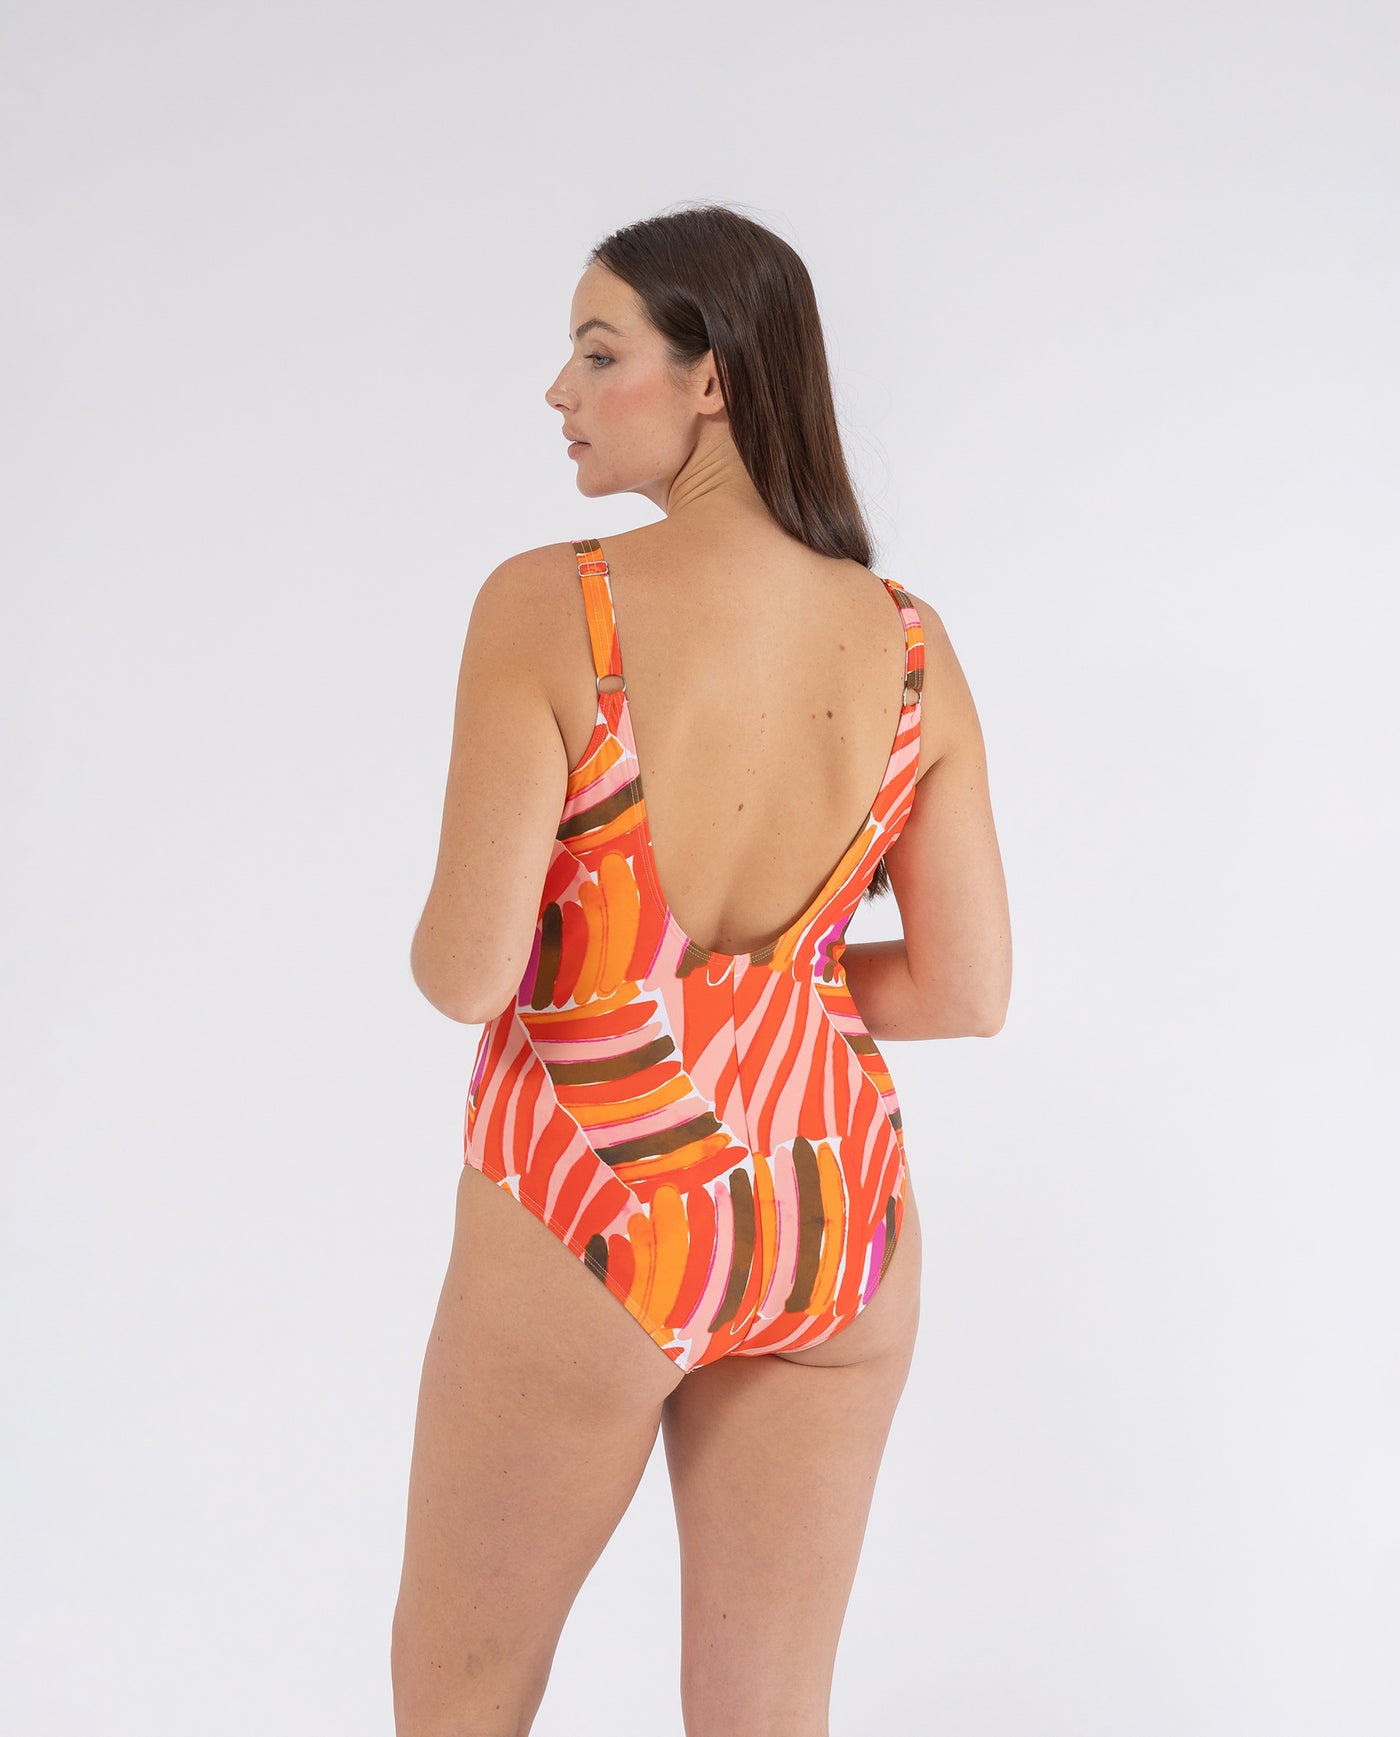 ABSTRACT PRINTED SWIMSUIT WITH ORANGE CUP